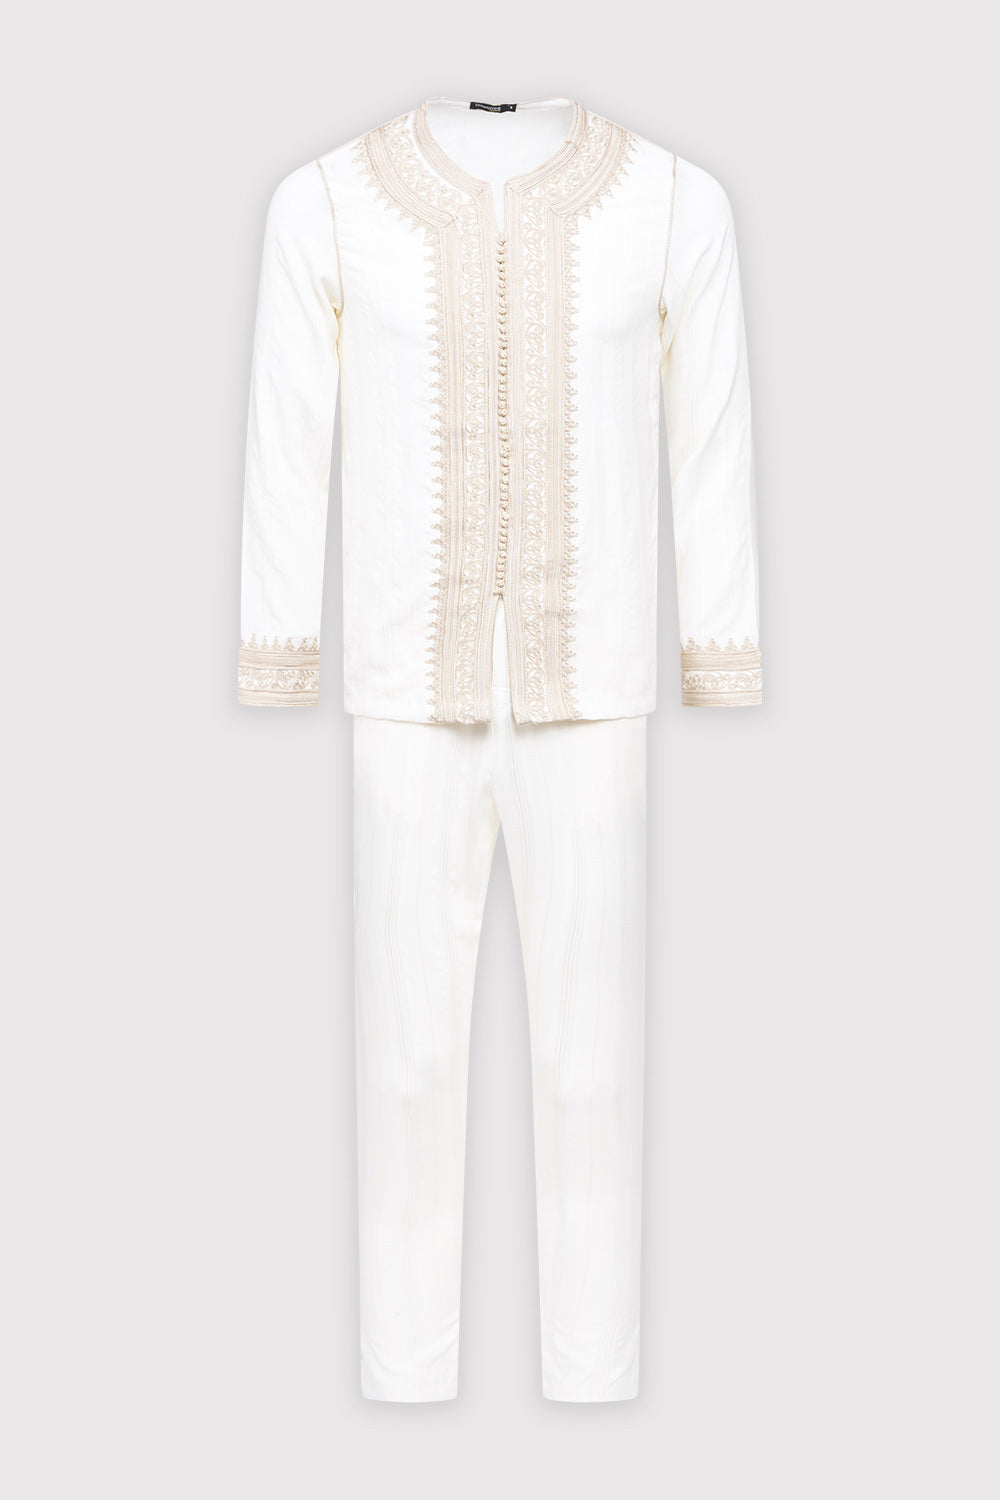 Jabador Nouh Embroidered Collarless Long Sleeve Tunic Top and Trousers Men's Co-Ord Set in Striped White